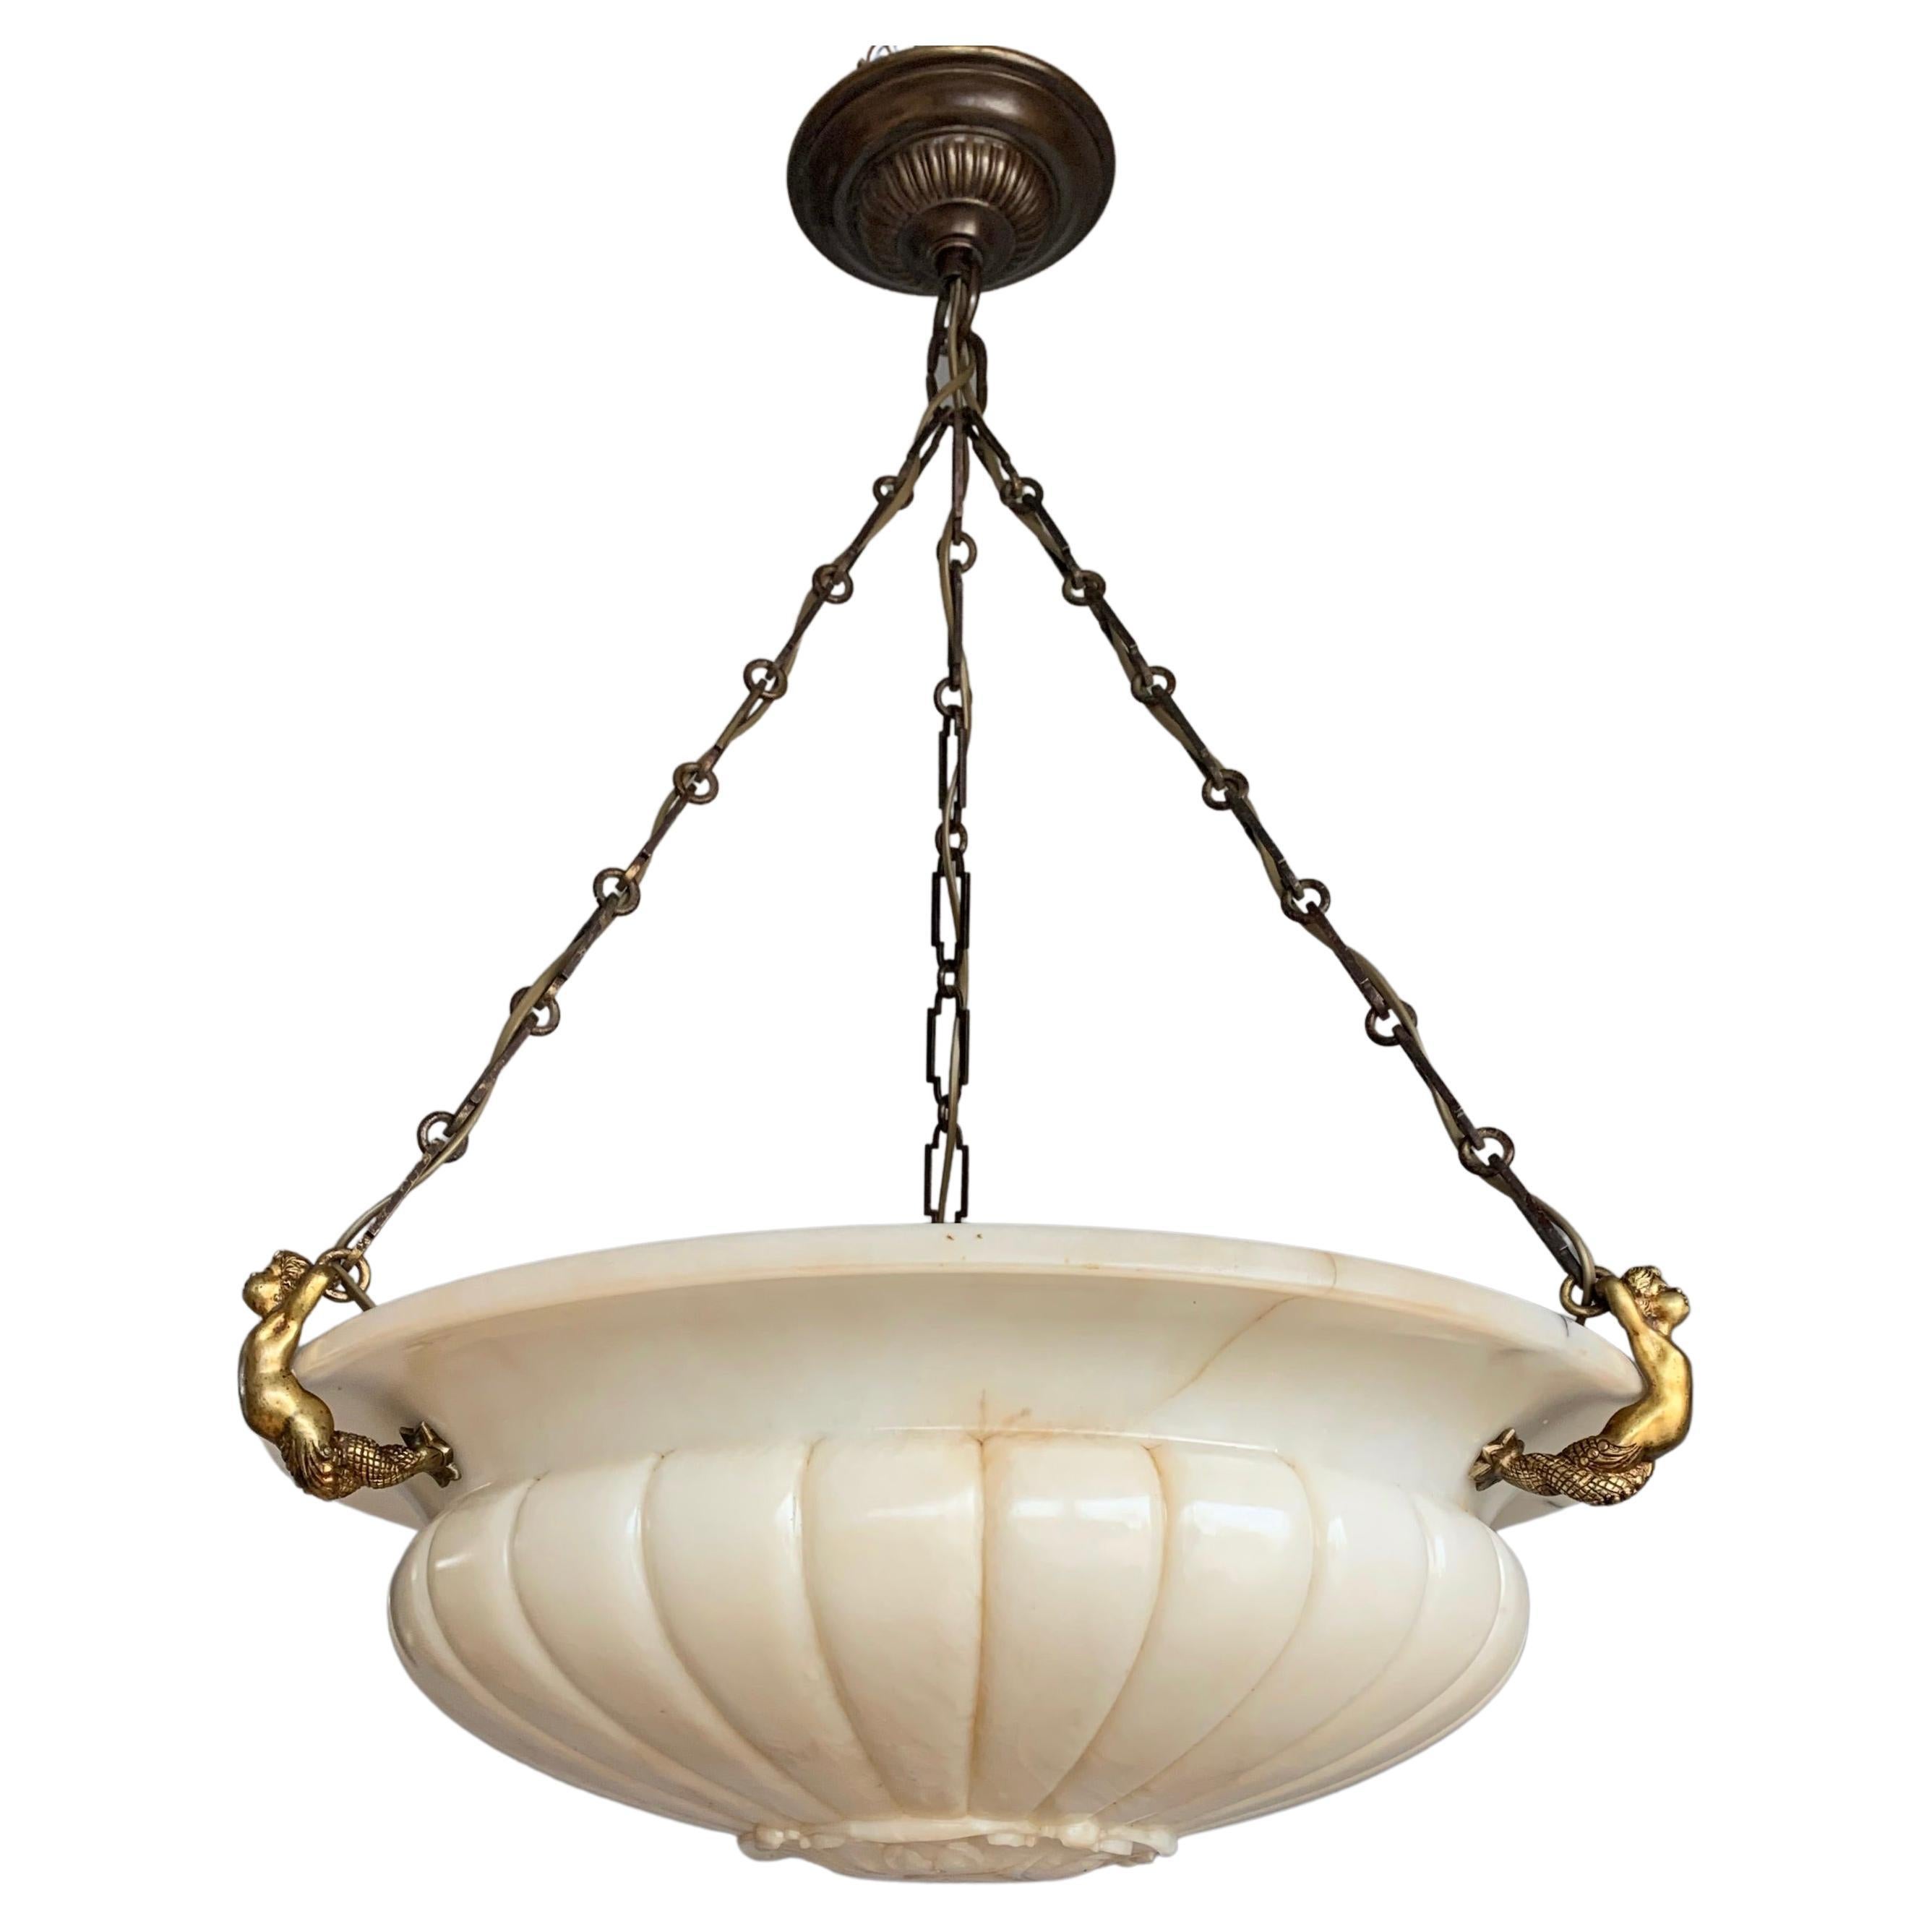 Stunning and one of a kind antique characteristic chandelier from the early 1900s.

This great looking and large Italian Neo Classical Style alabaster mineral stone chandelier will light up your day every time you look at it. The deeply carved lines